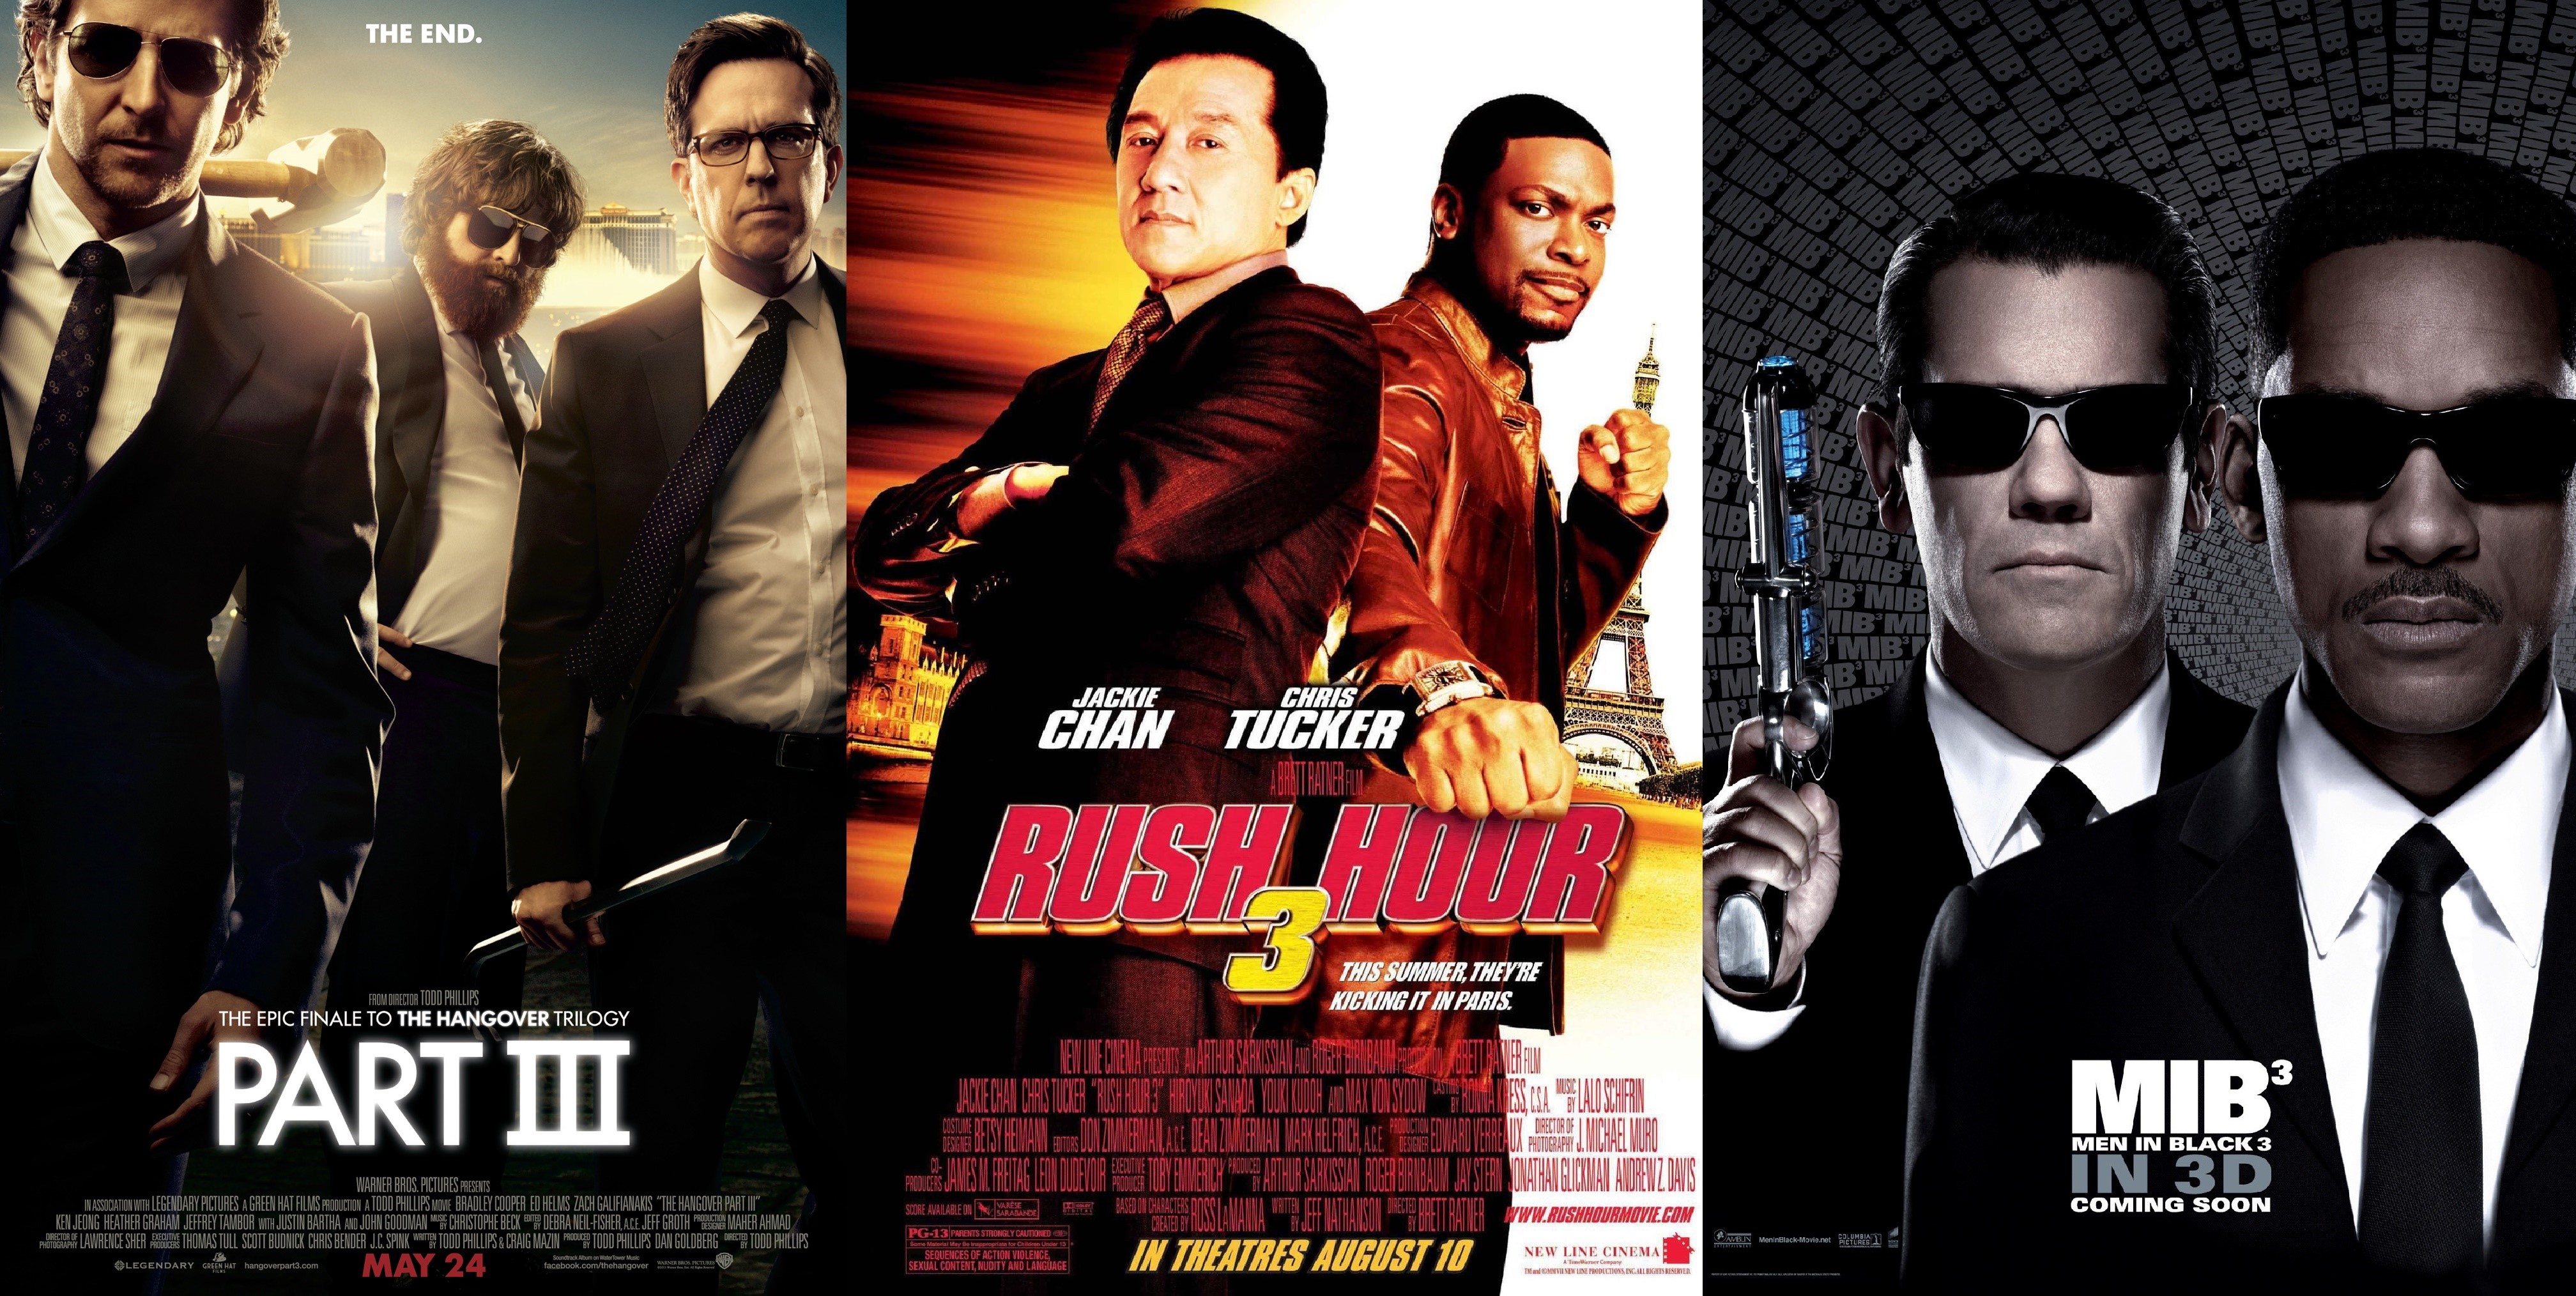 Ride Along 3 triology